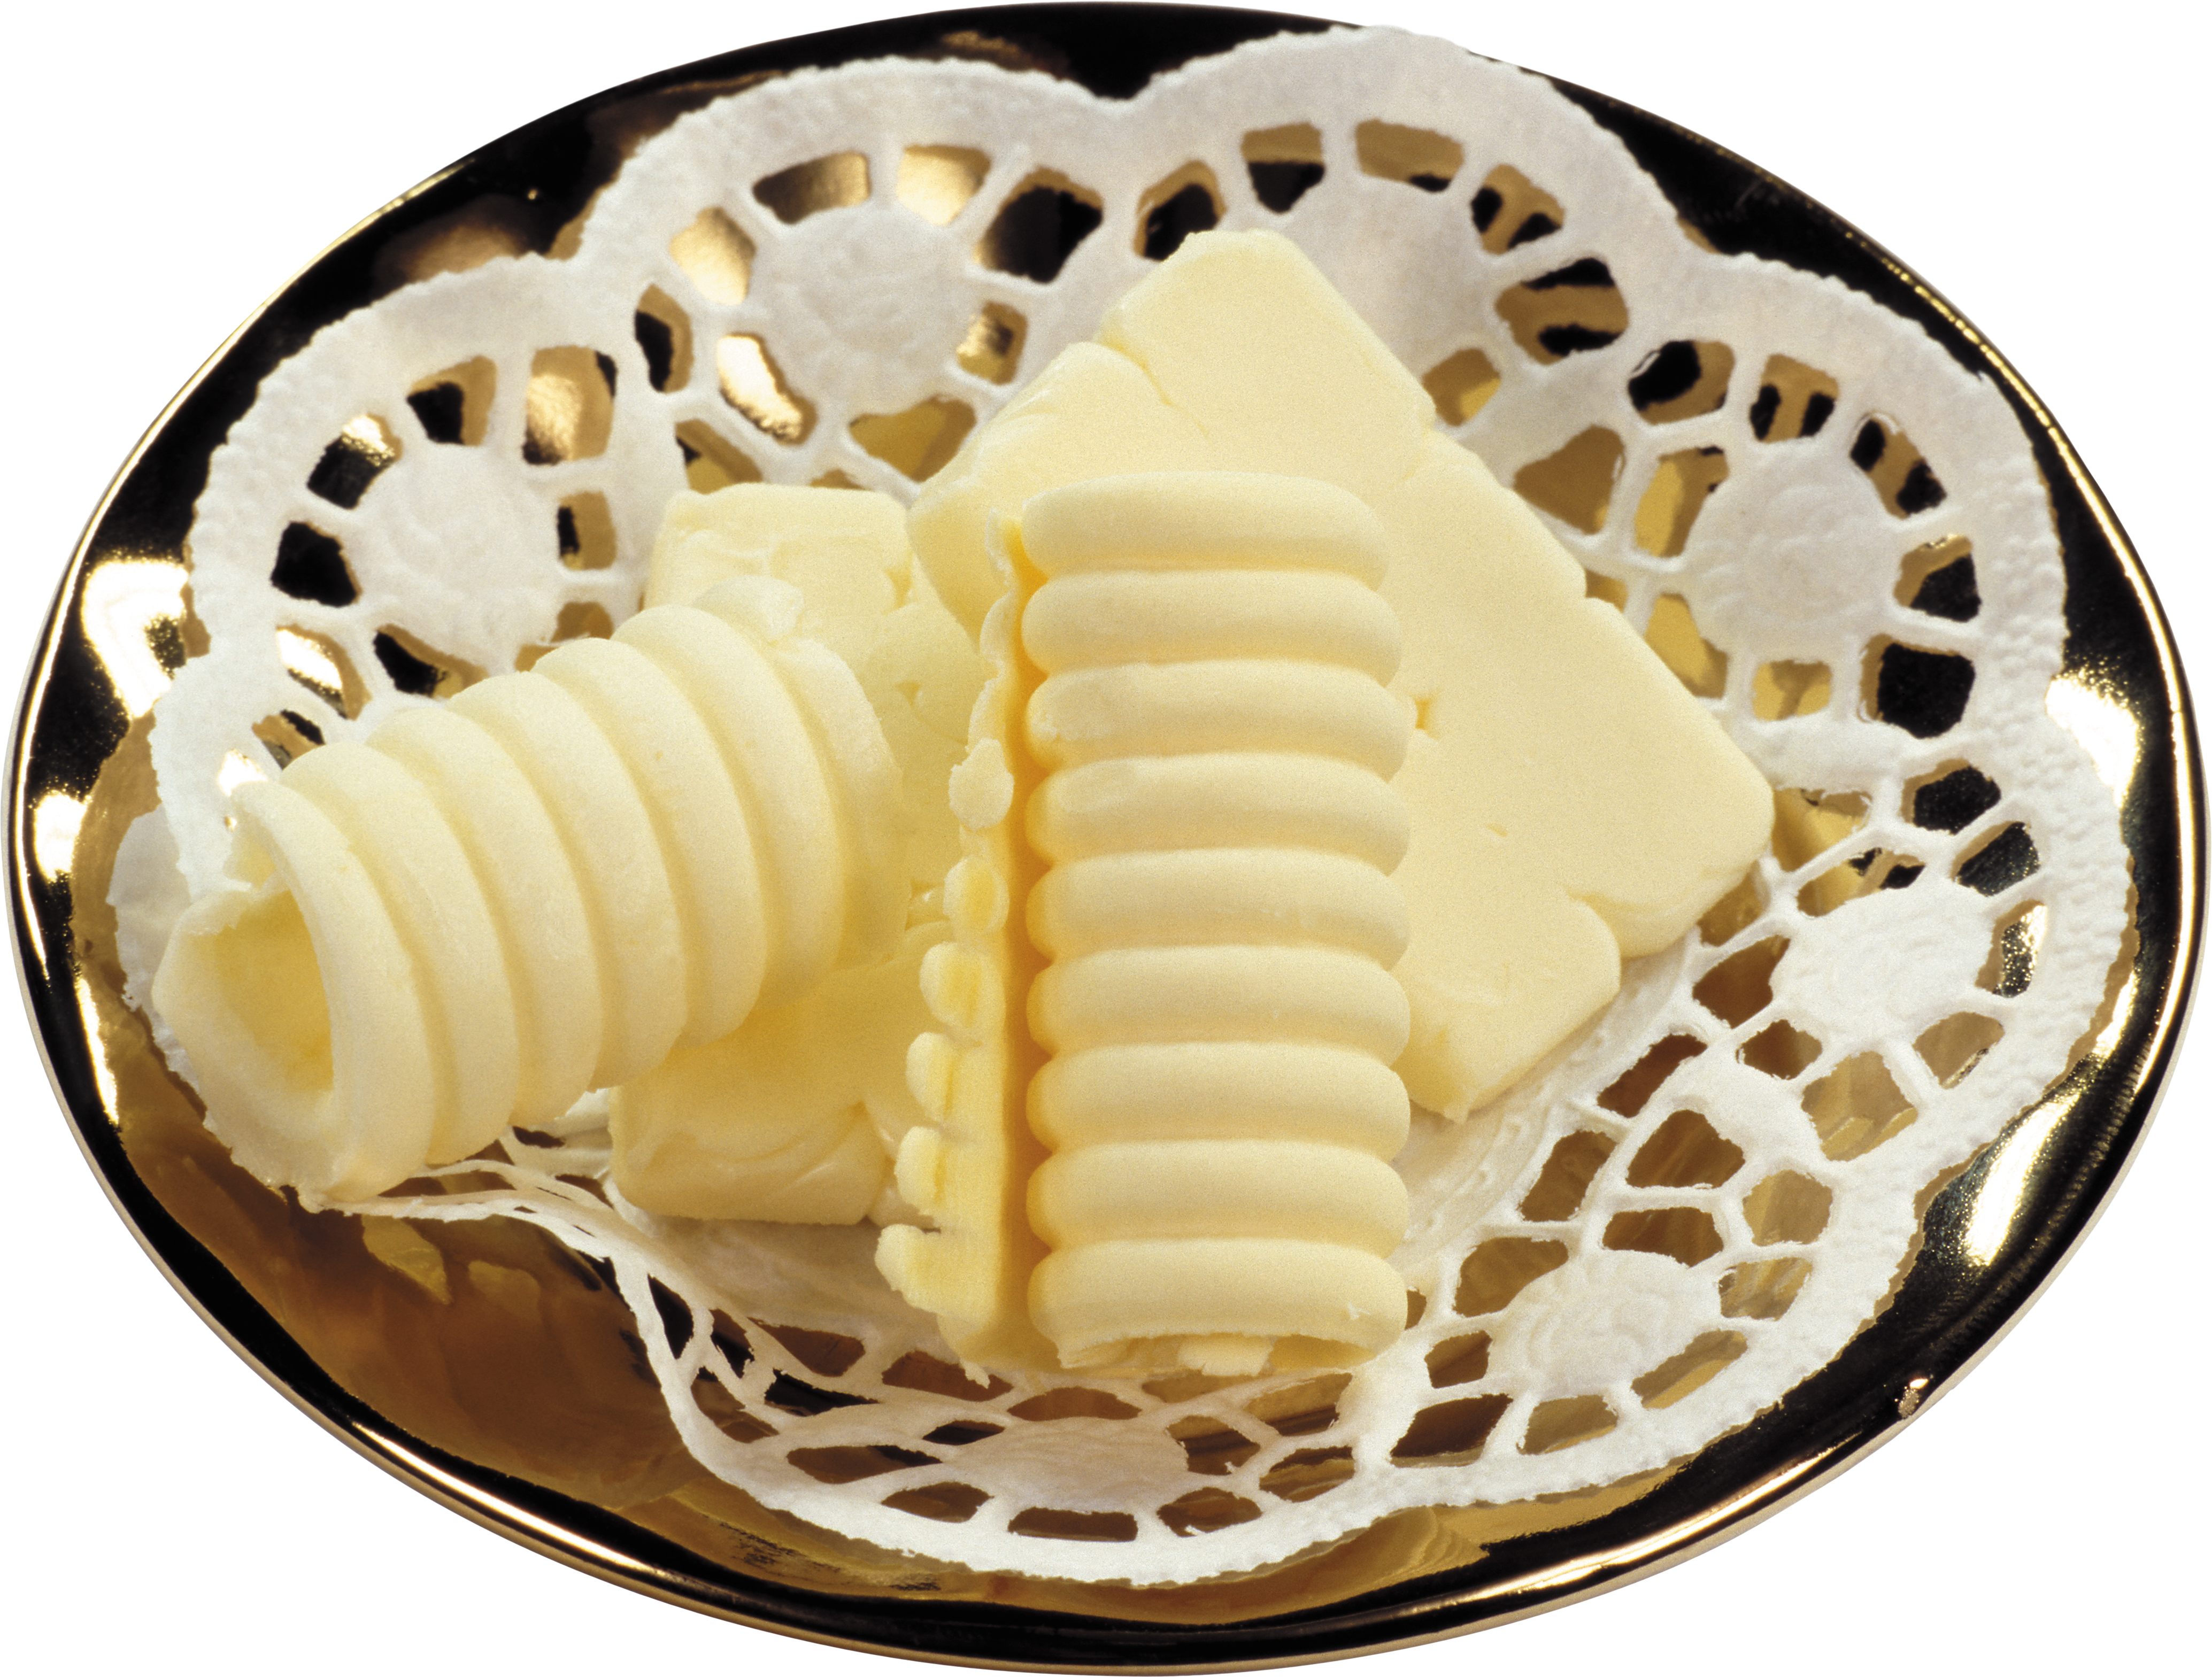 Butter PNG image